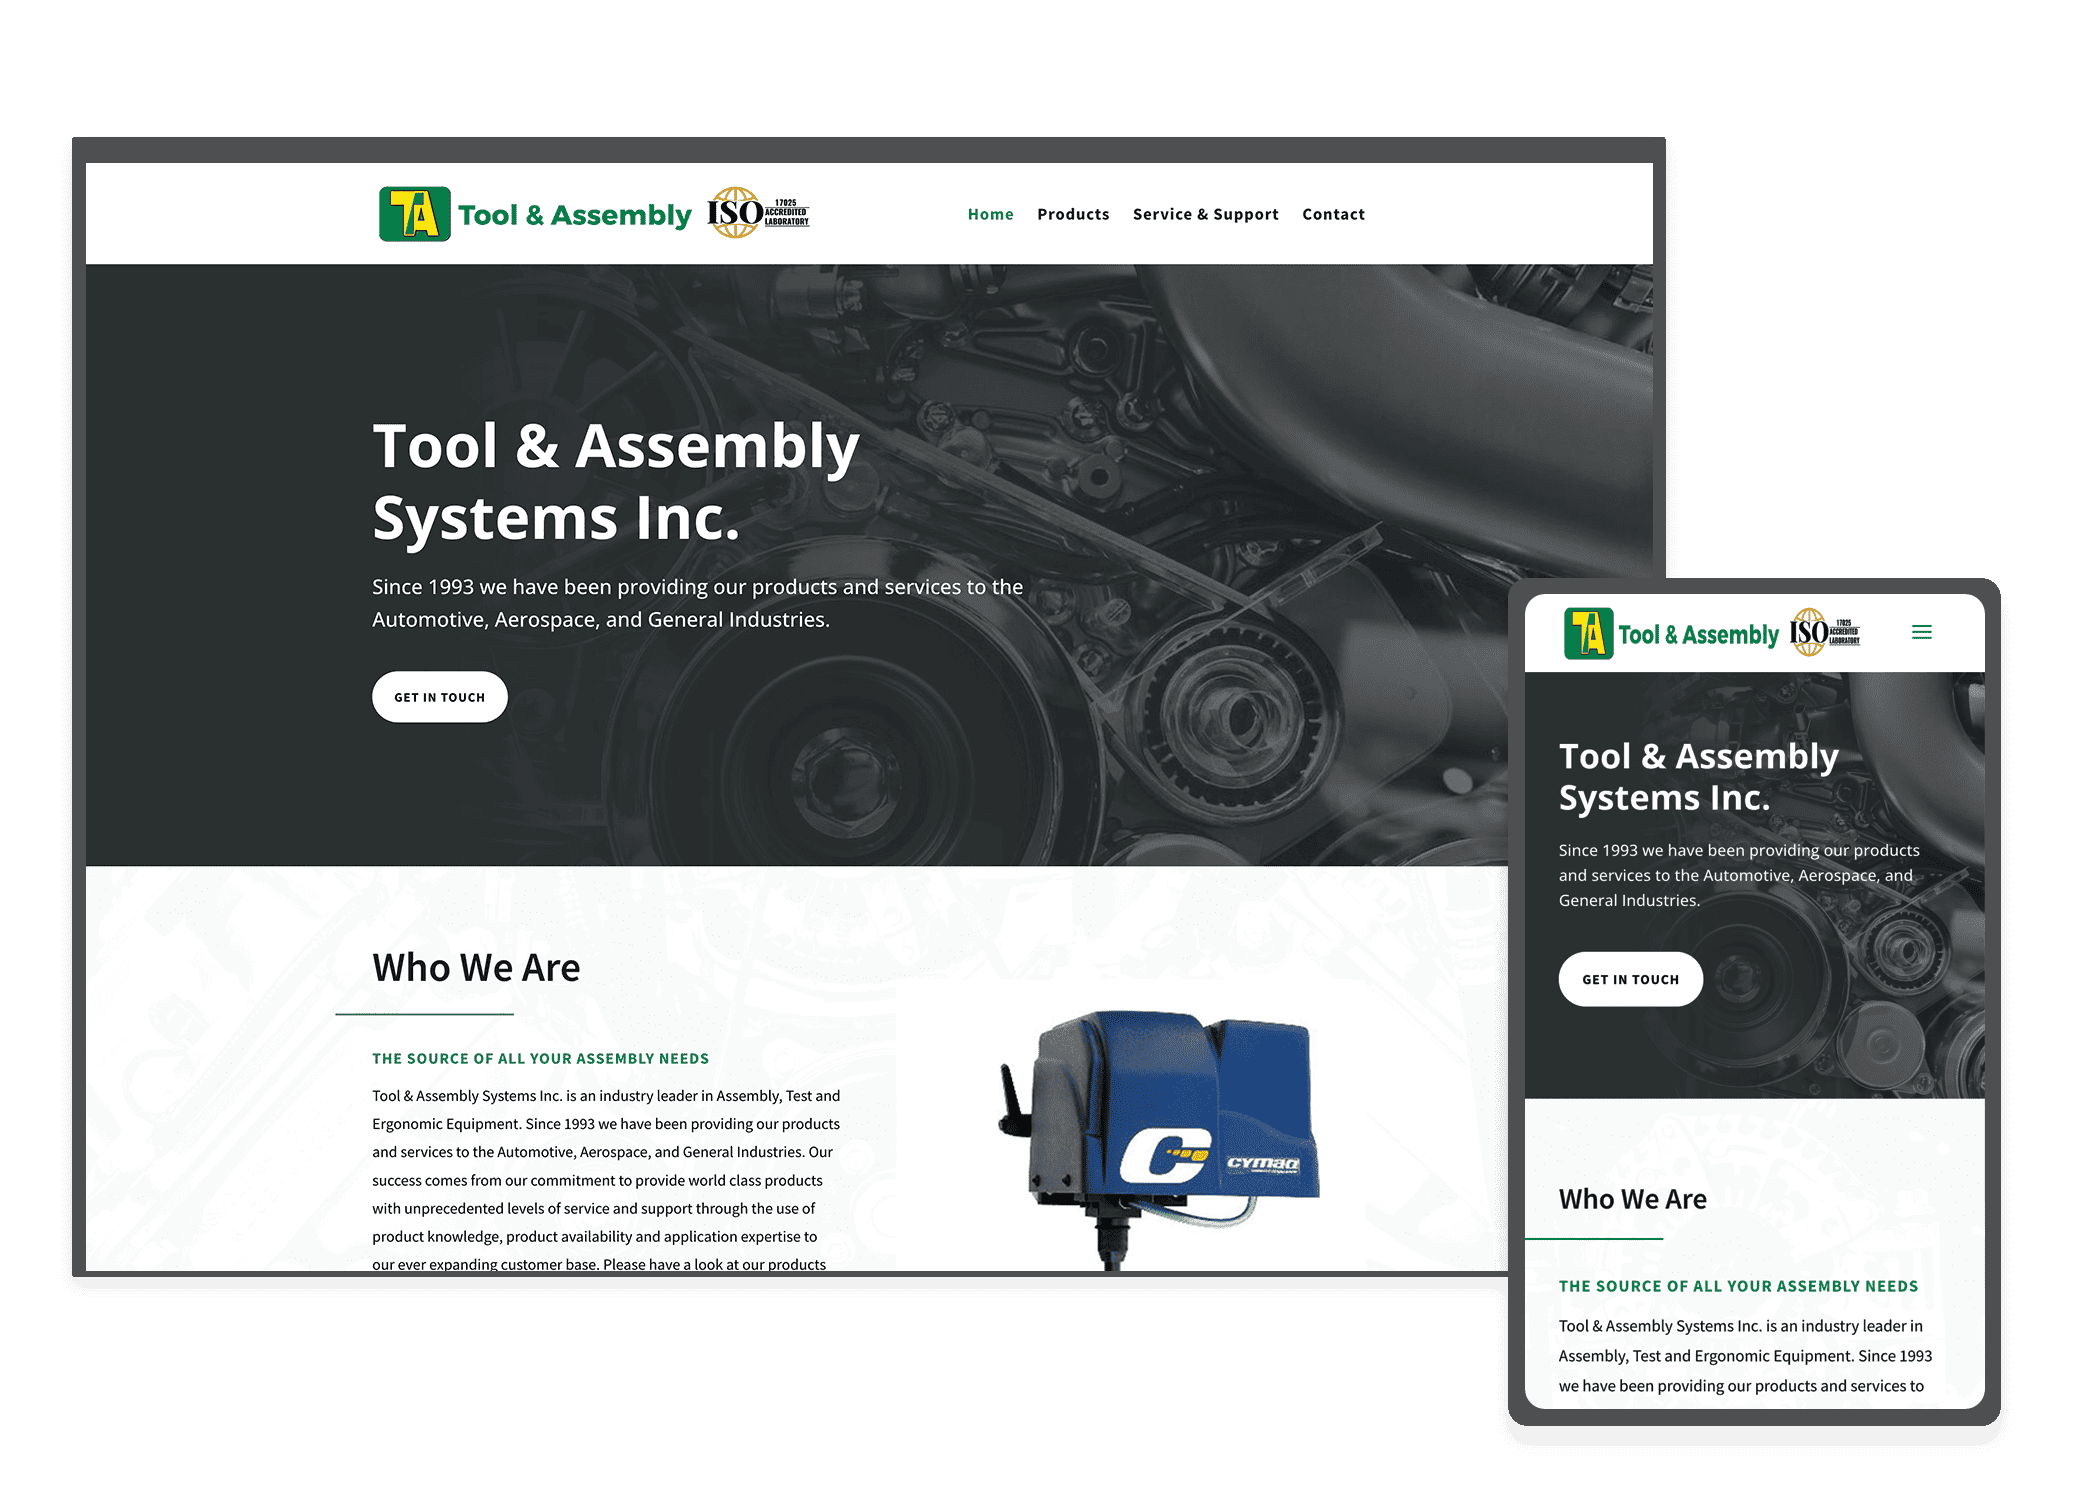 Toronto Tool & Assembly Systems Inc